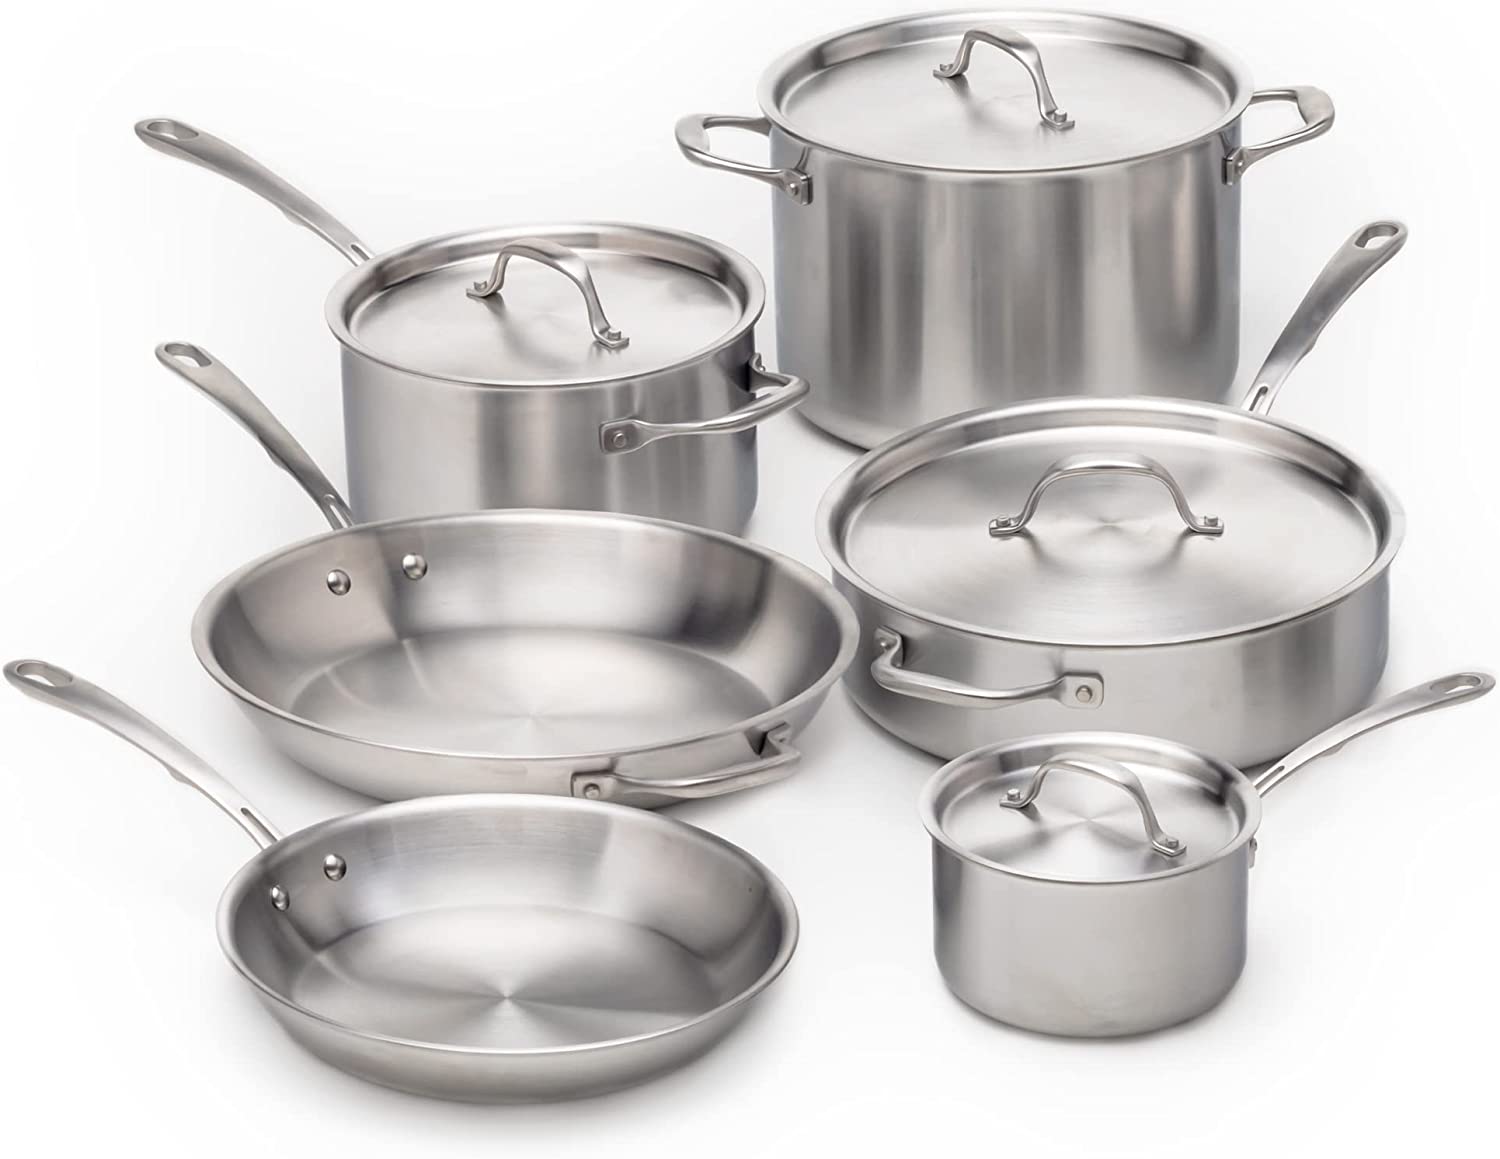 stainless steel cookware set Malaysia